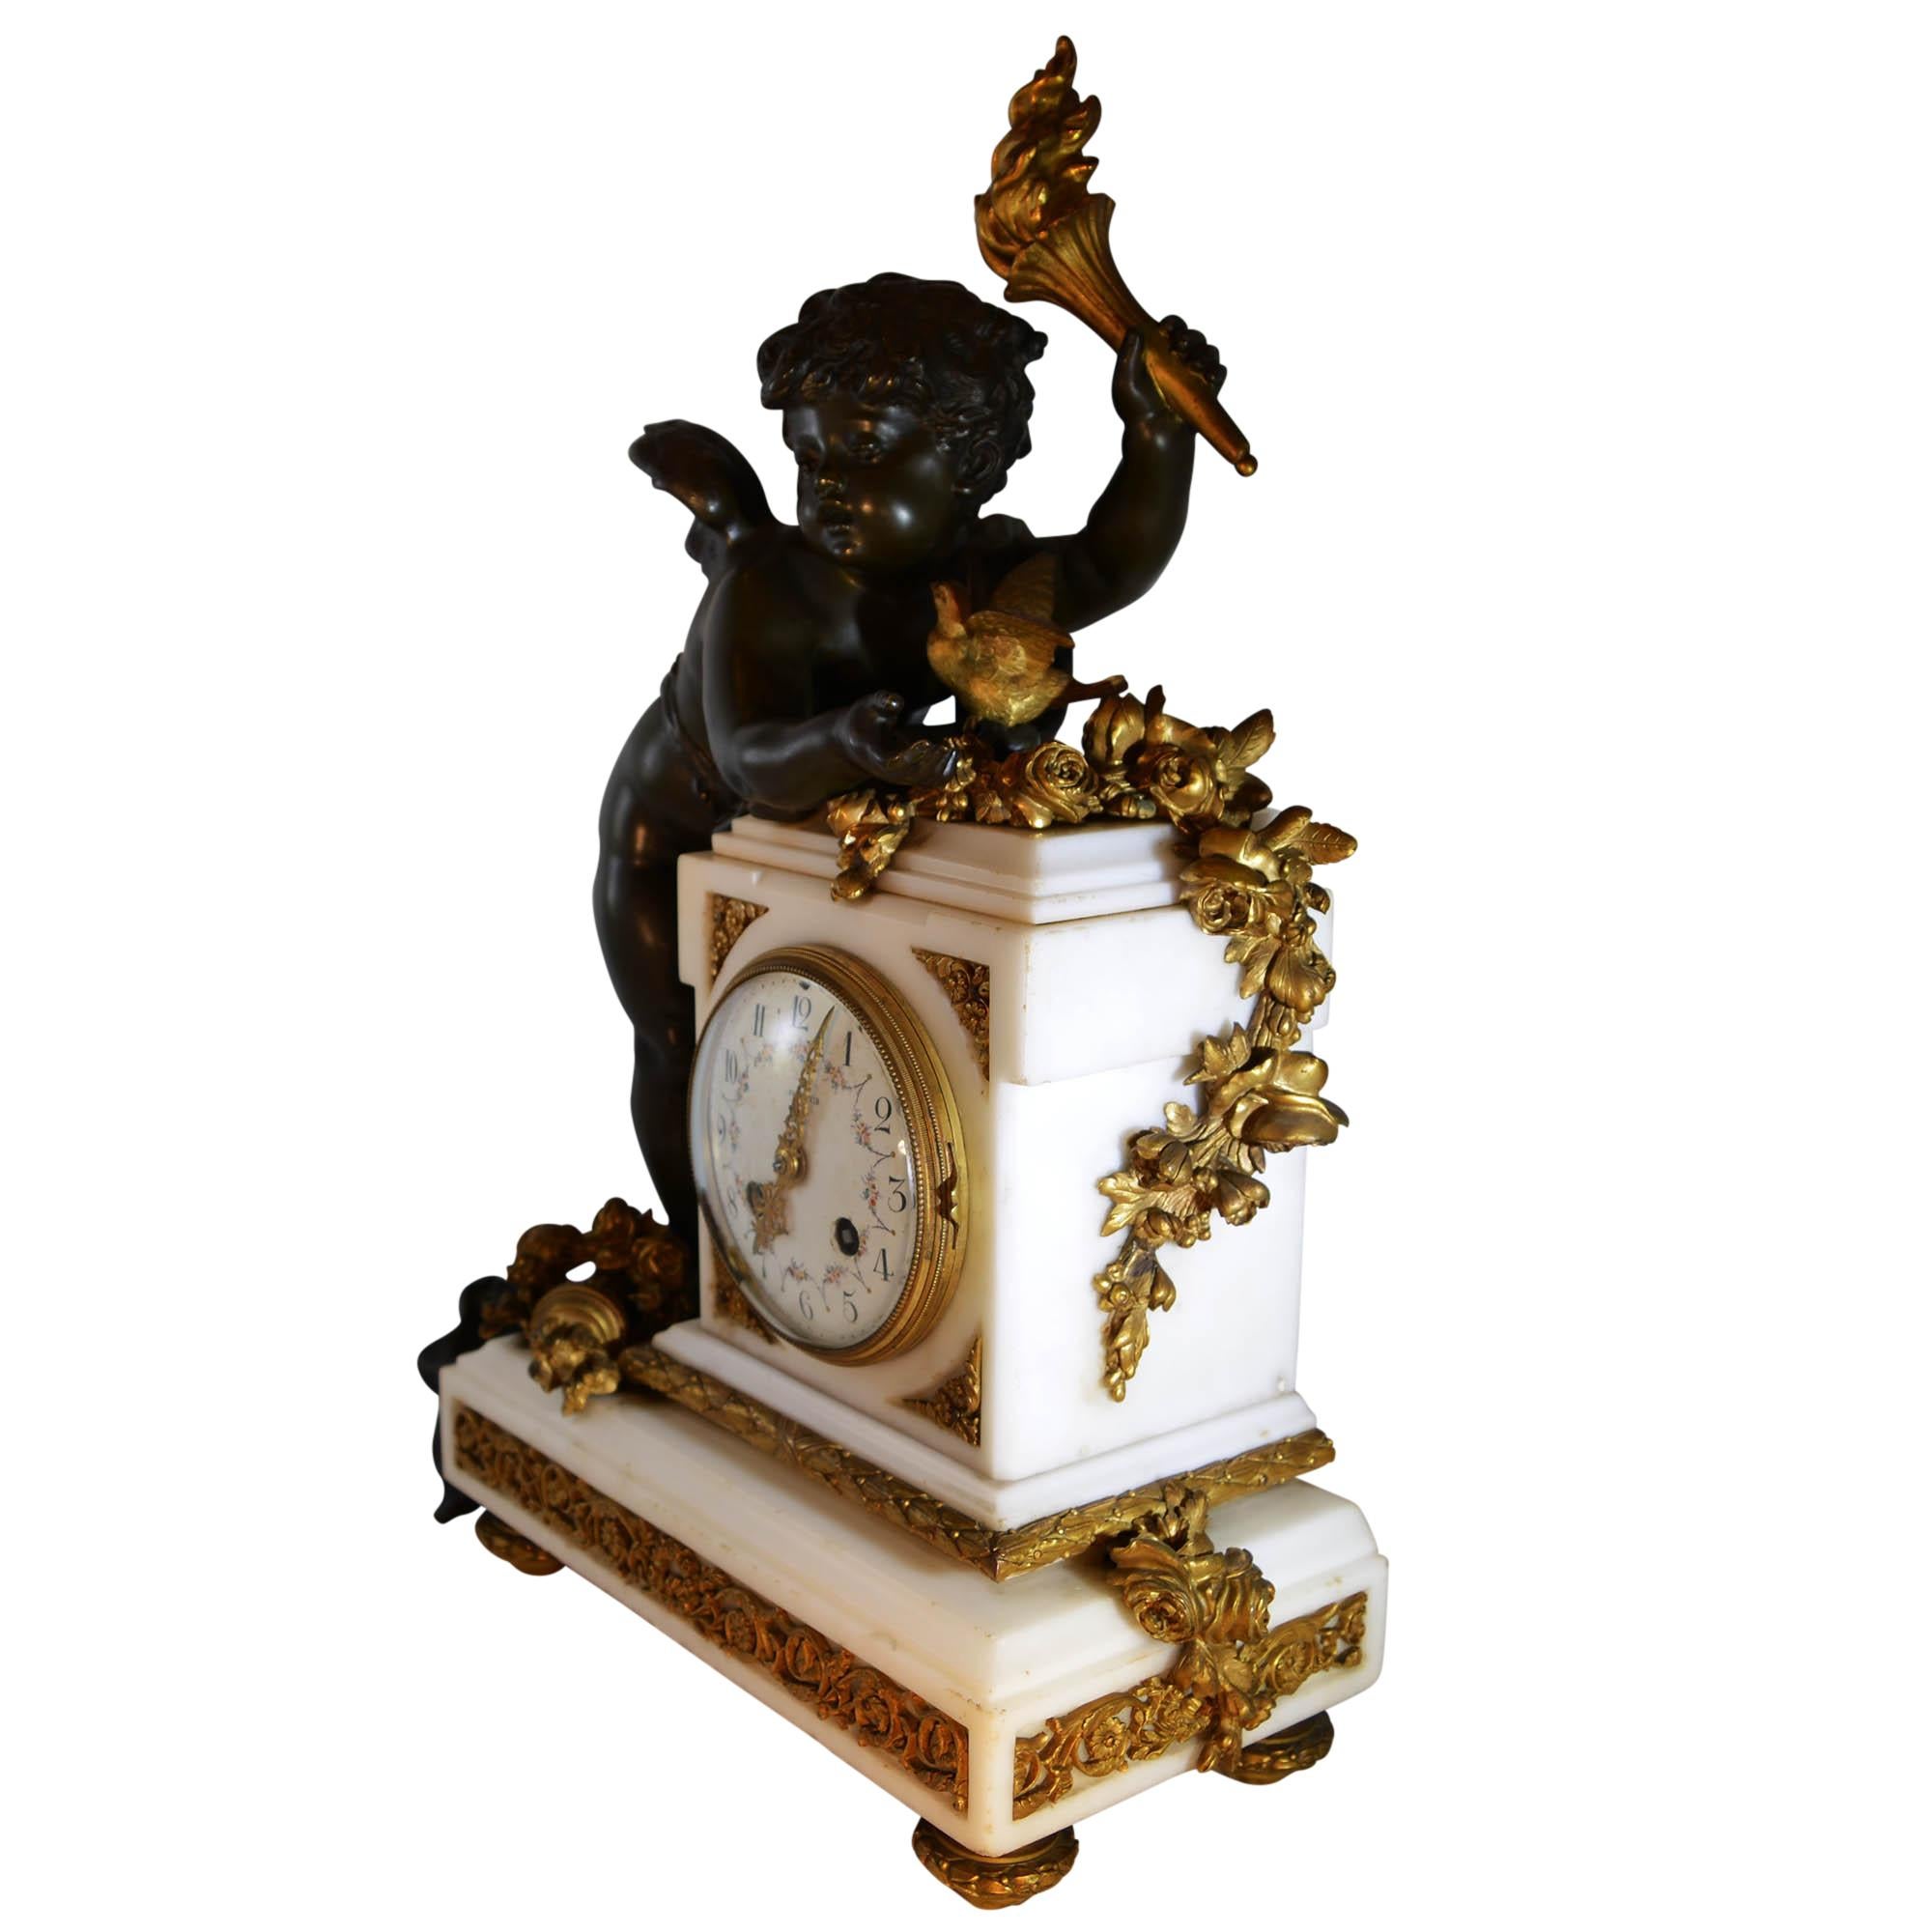 Magnificent antique Louis XVI style gilded ormolu and white marble mantel clock with a cherub of beautiful patina color holding a torch leaning against the clock. The cherub is accompanied by a bird with outstretched wings. The base is extremely